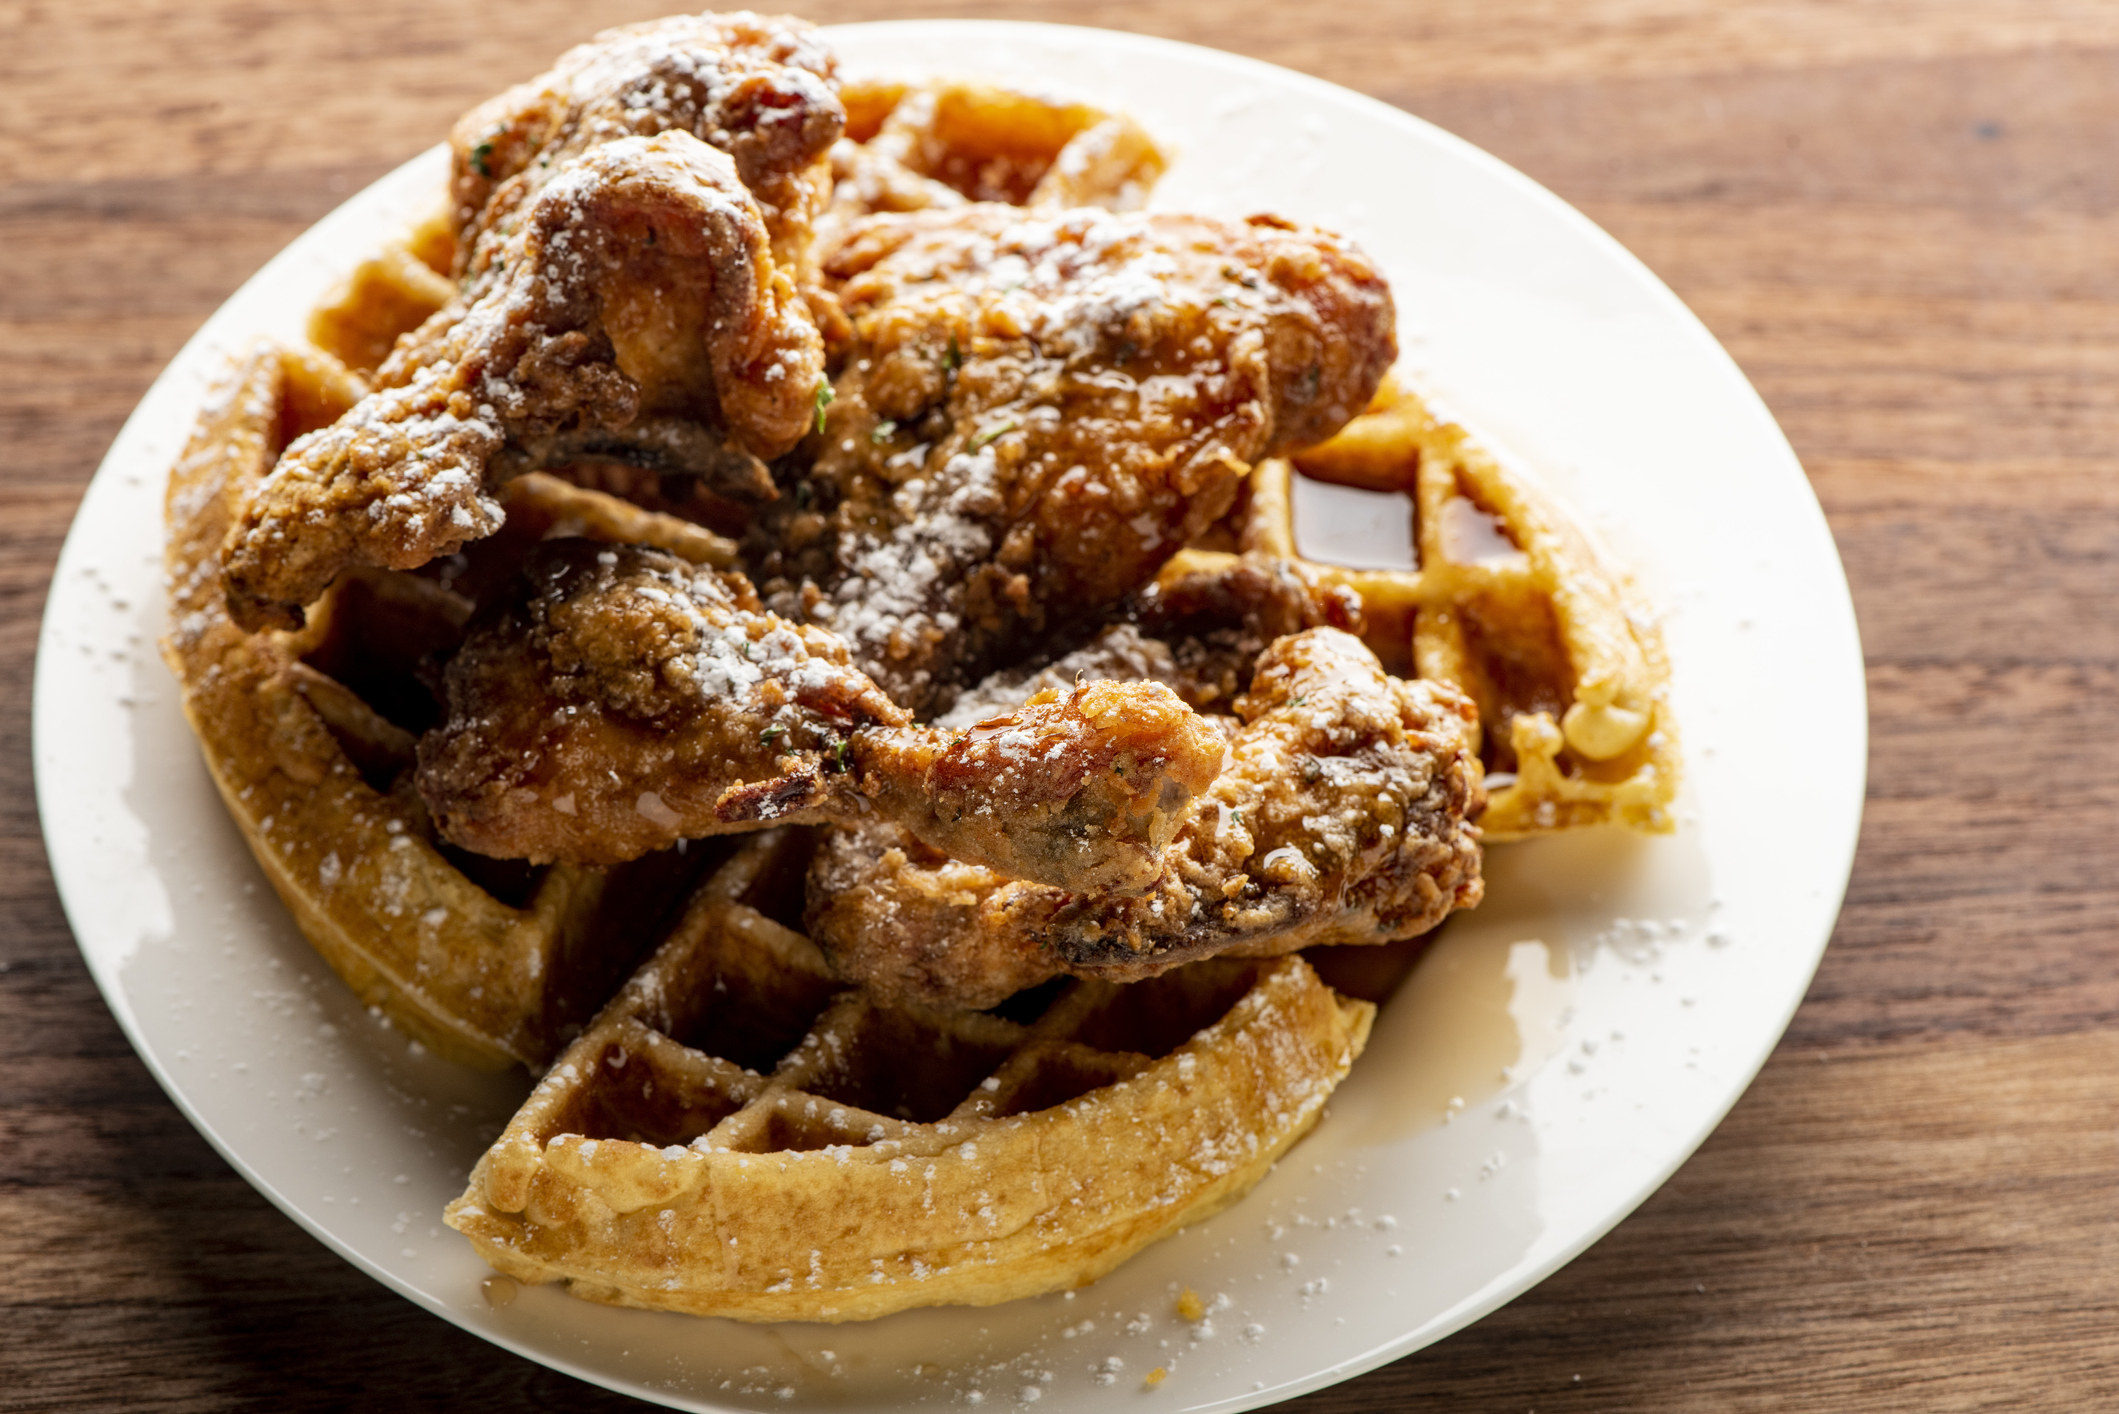 Fried chicken and waffles with syrup.